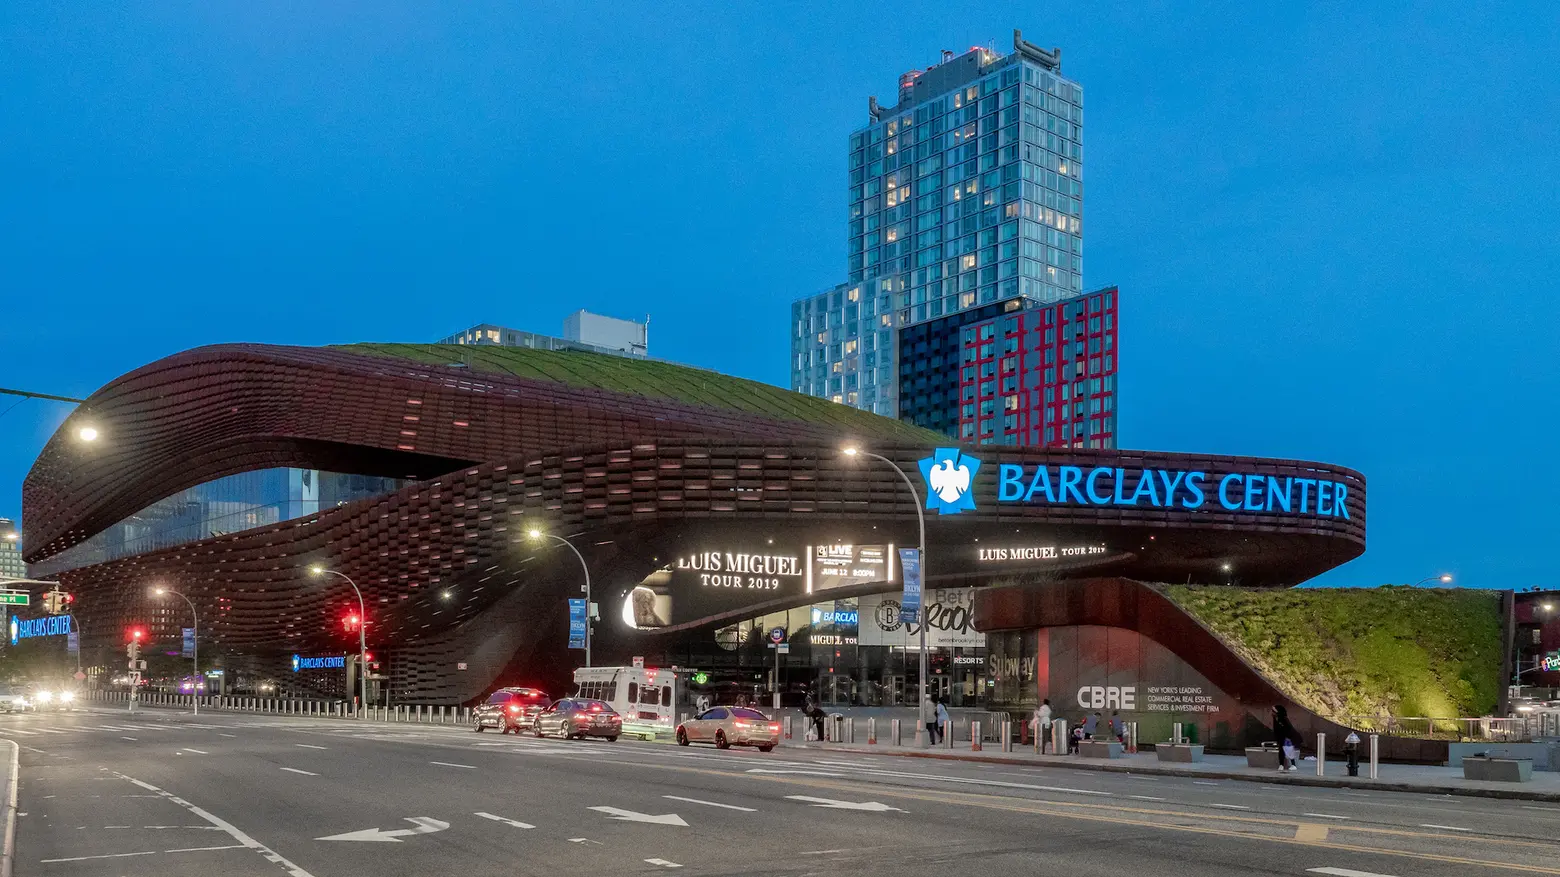 Barclays Center to welcome limited number of fans back